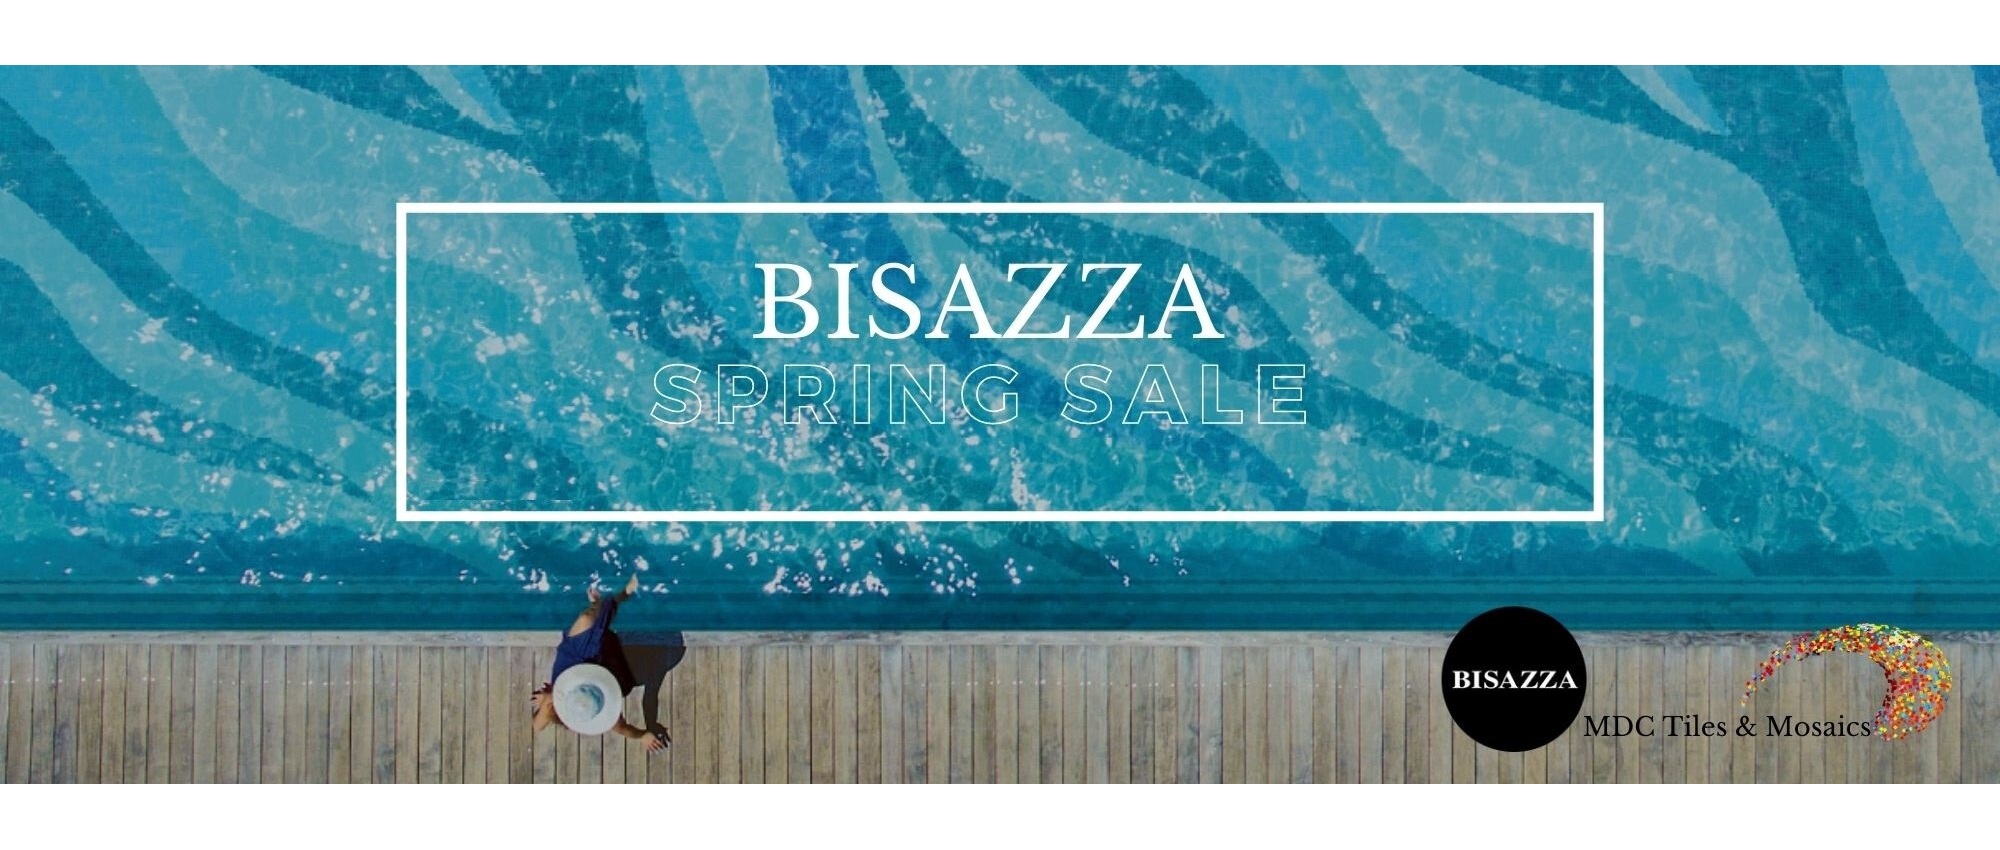 Bisazza Pool Tiles by MDC Mosaics and Tiles